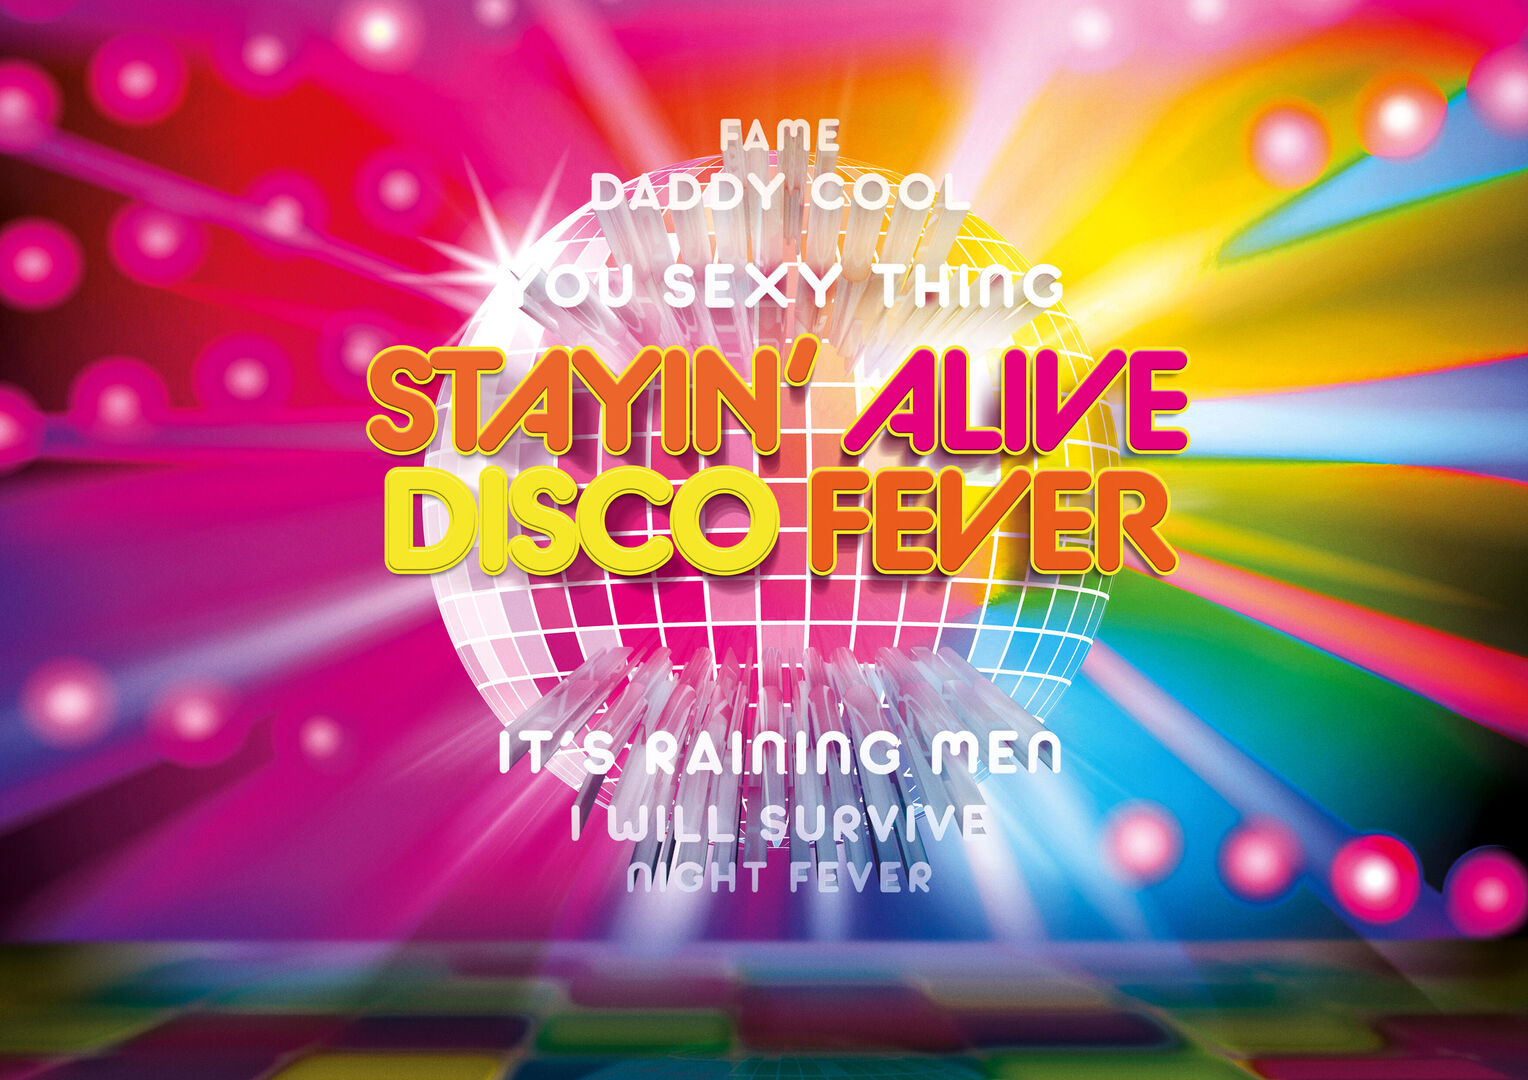 Stayin’ Alive Disco Fever